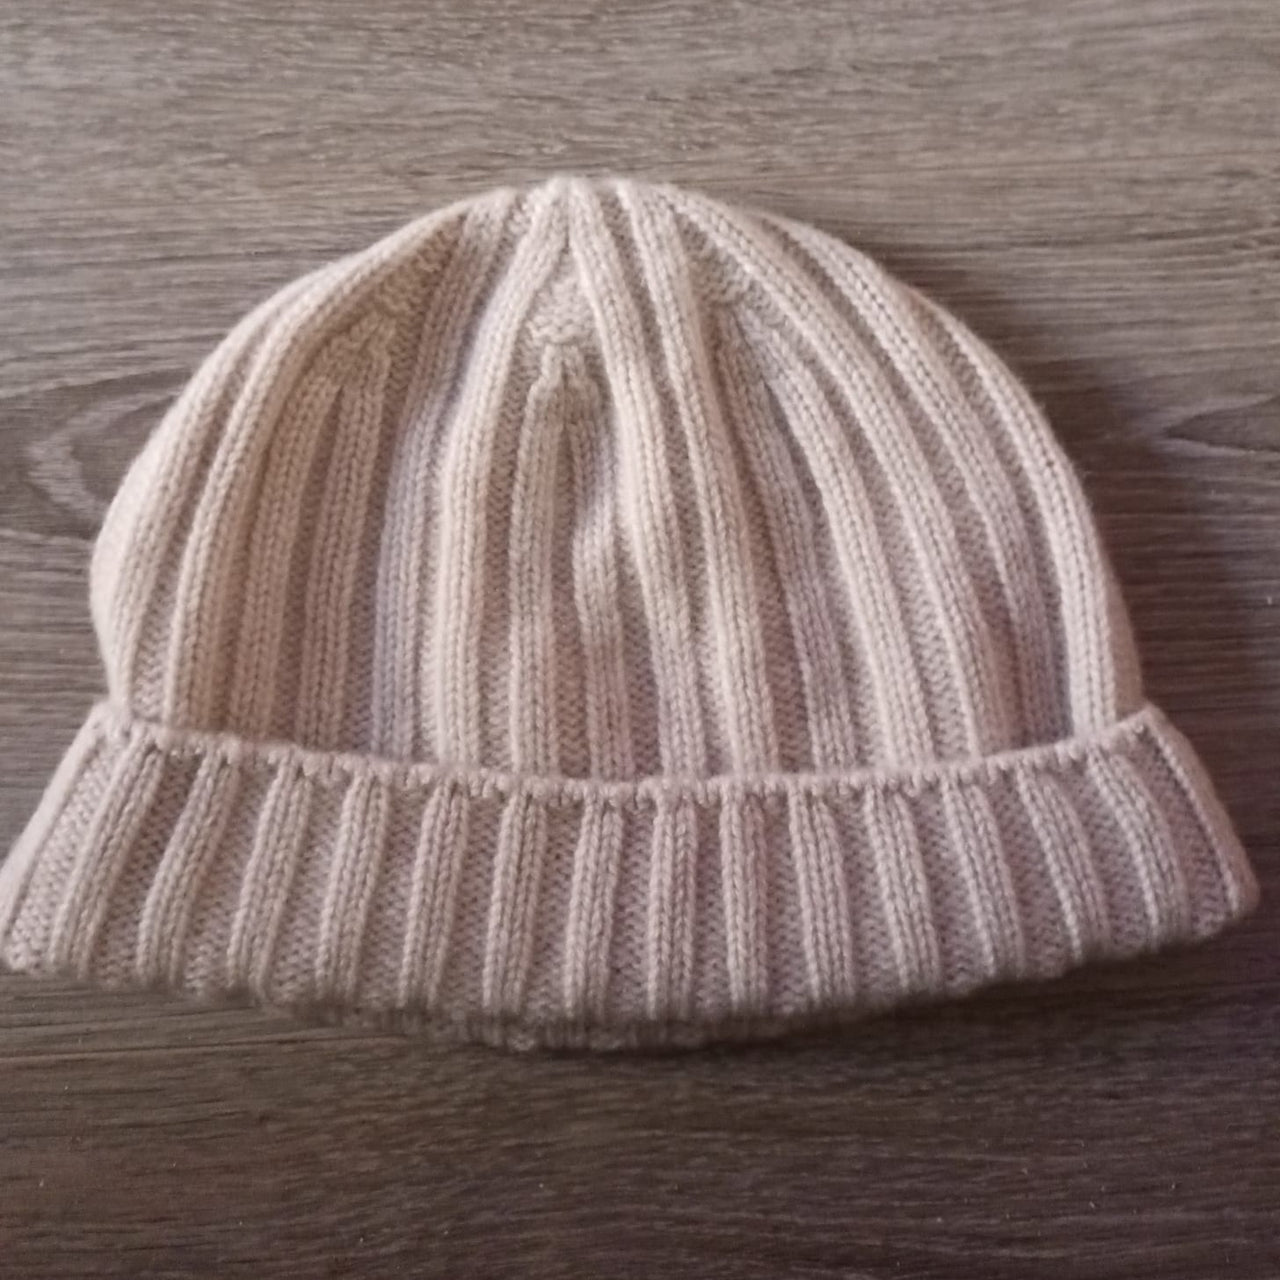 100% Cashmere Beanies in